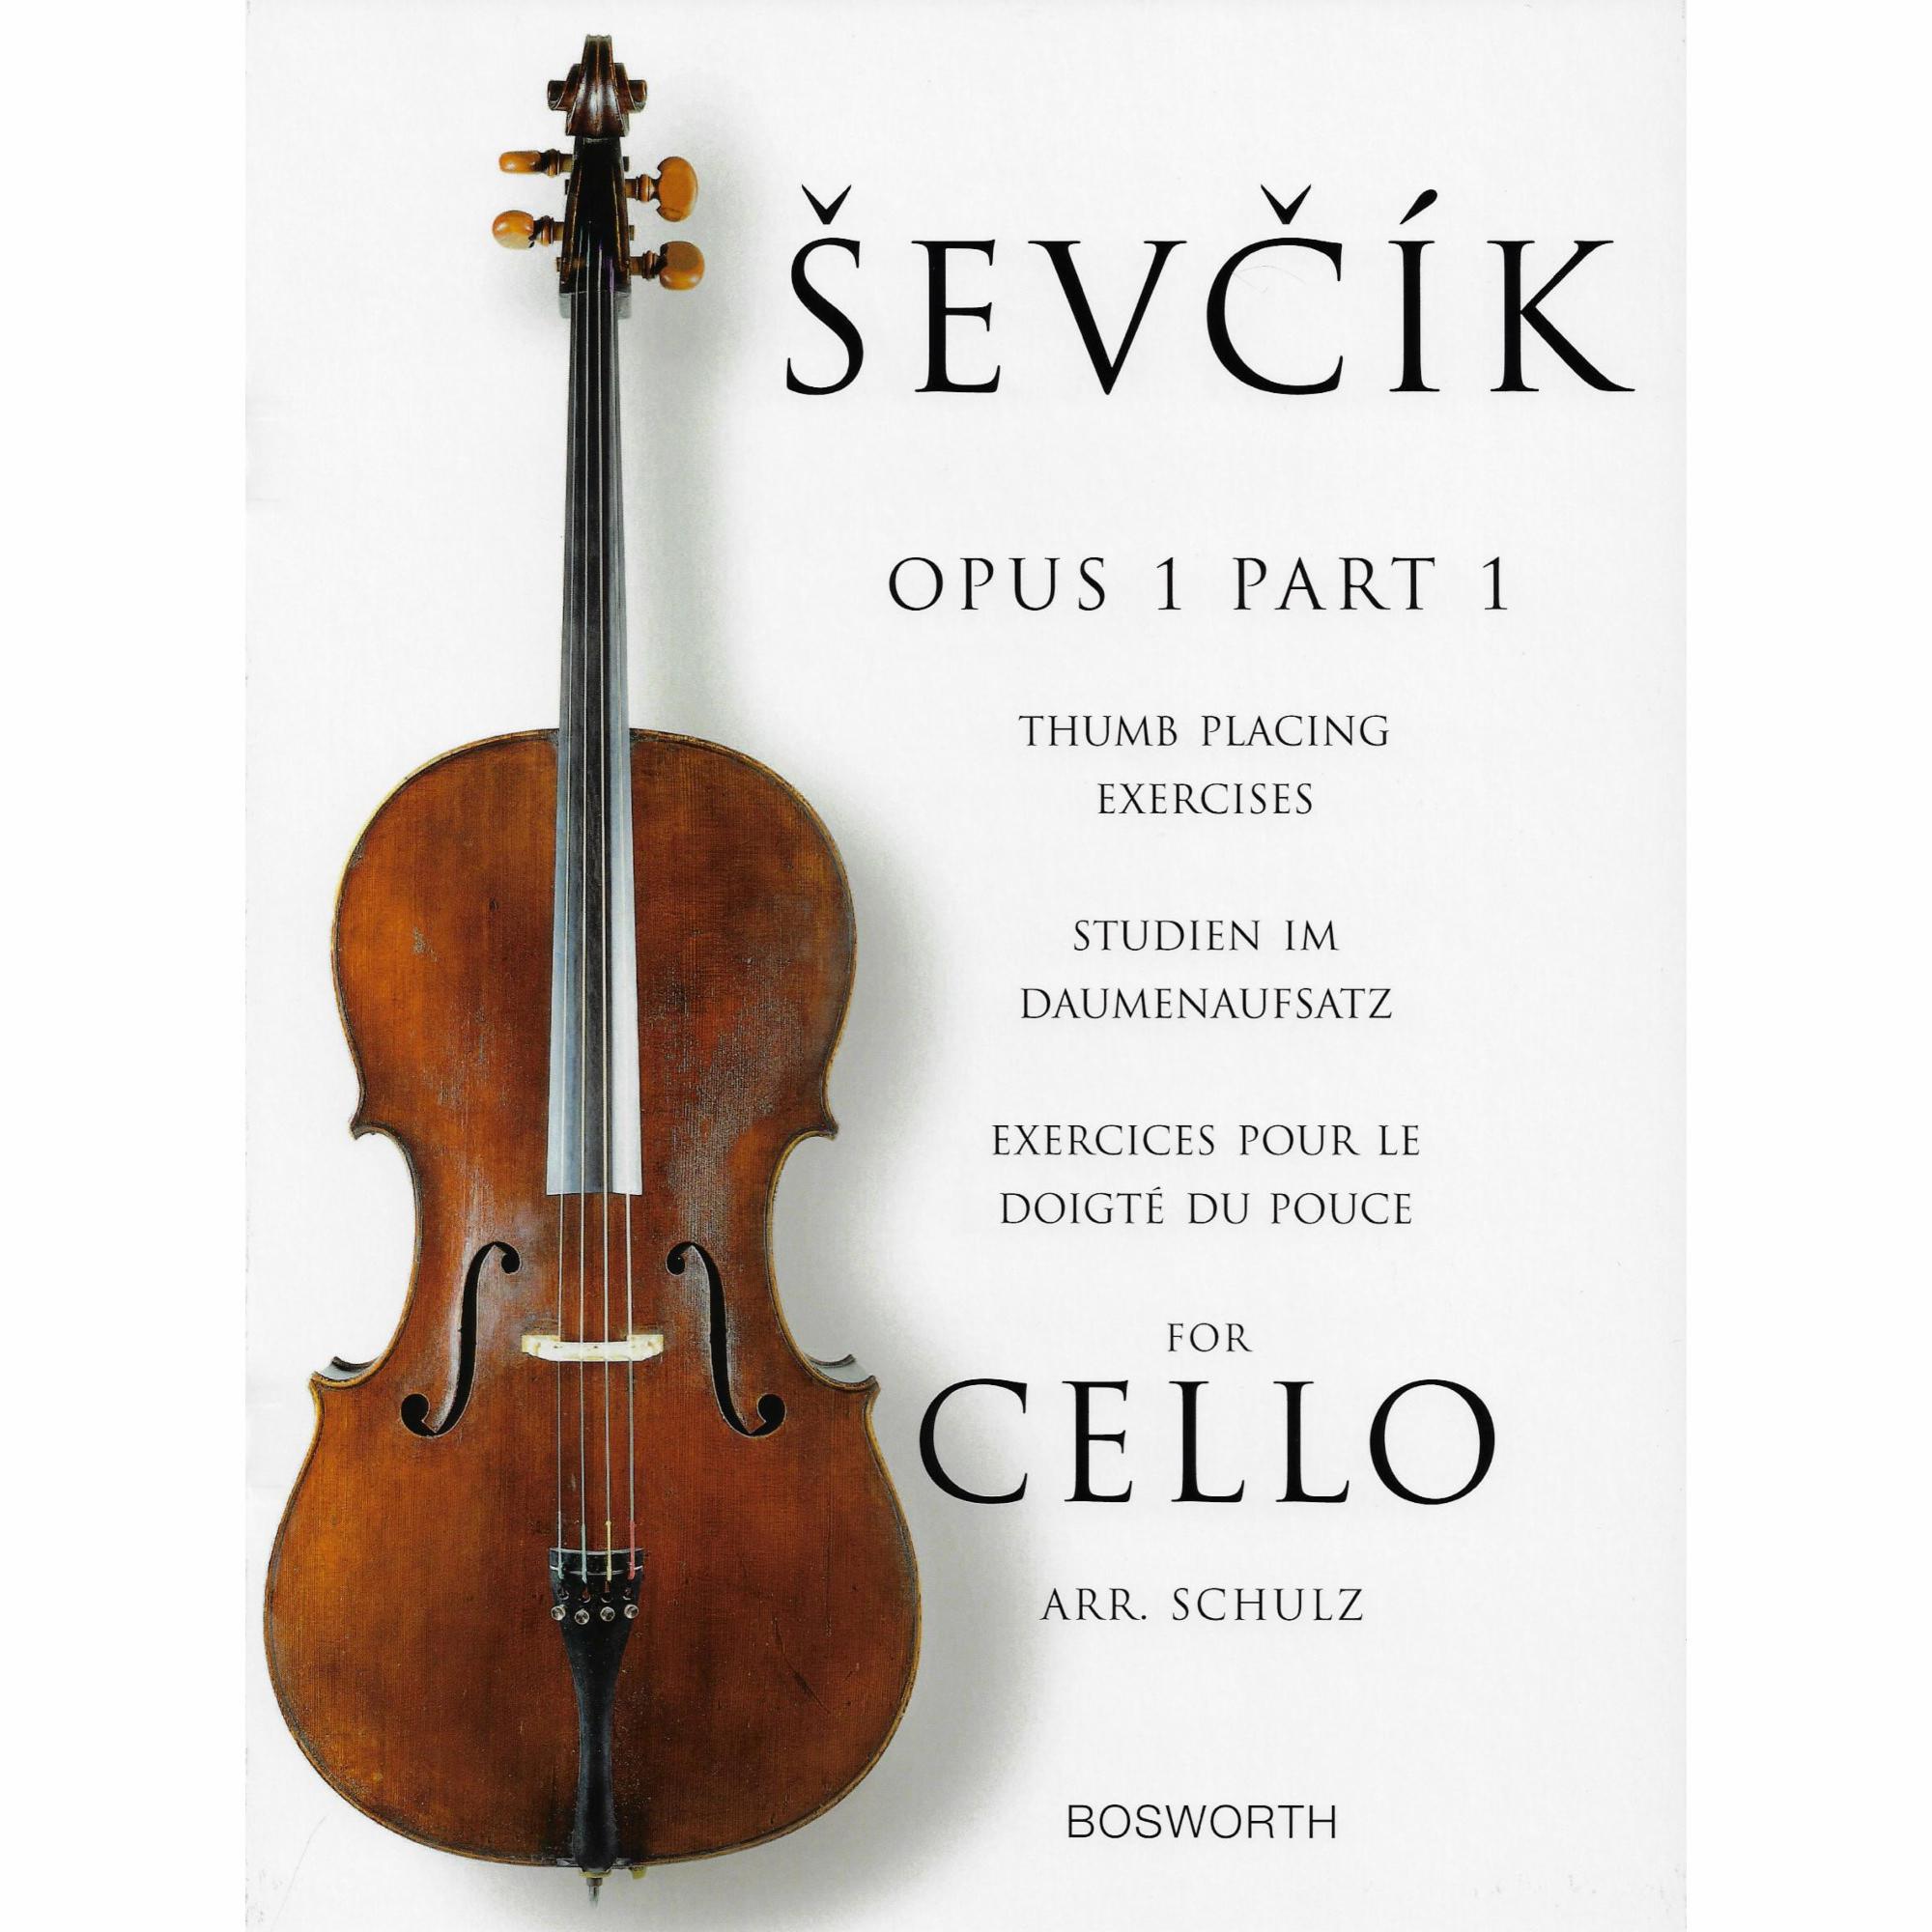 Sevcik -- Thumb Placing Exercises, Op. 1, Part 1 for Cello